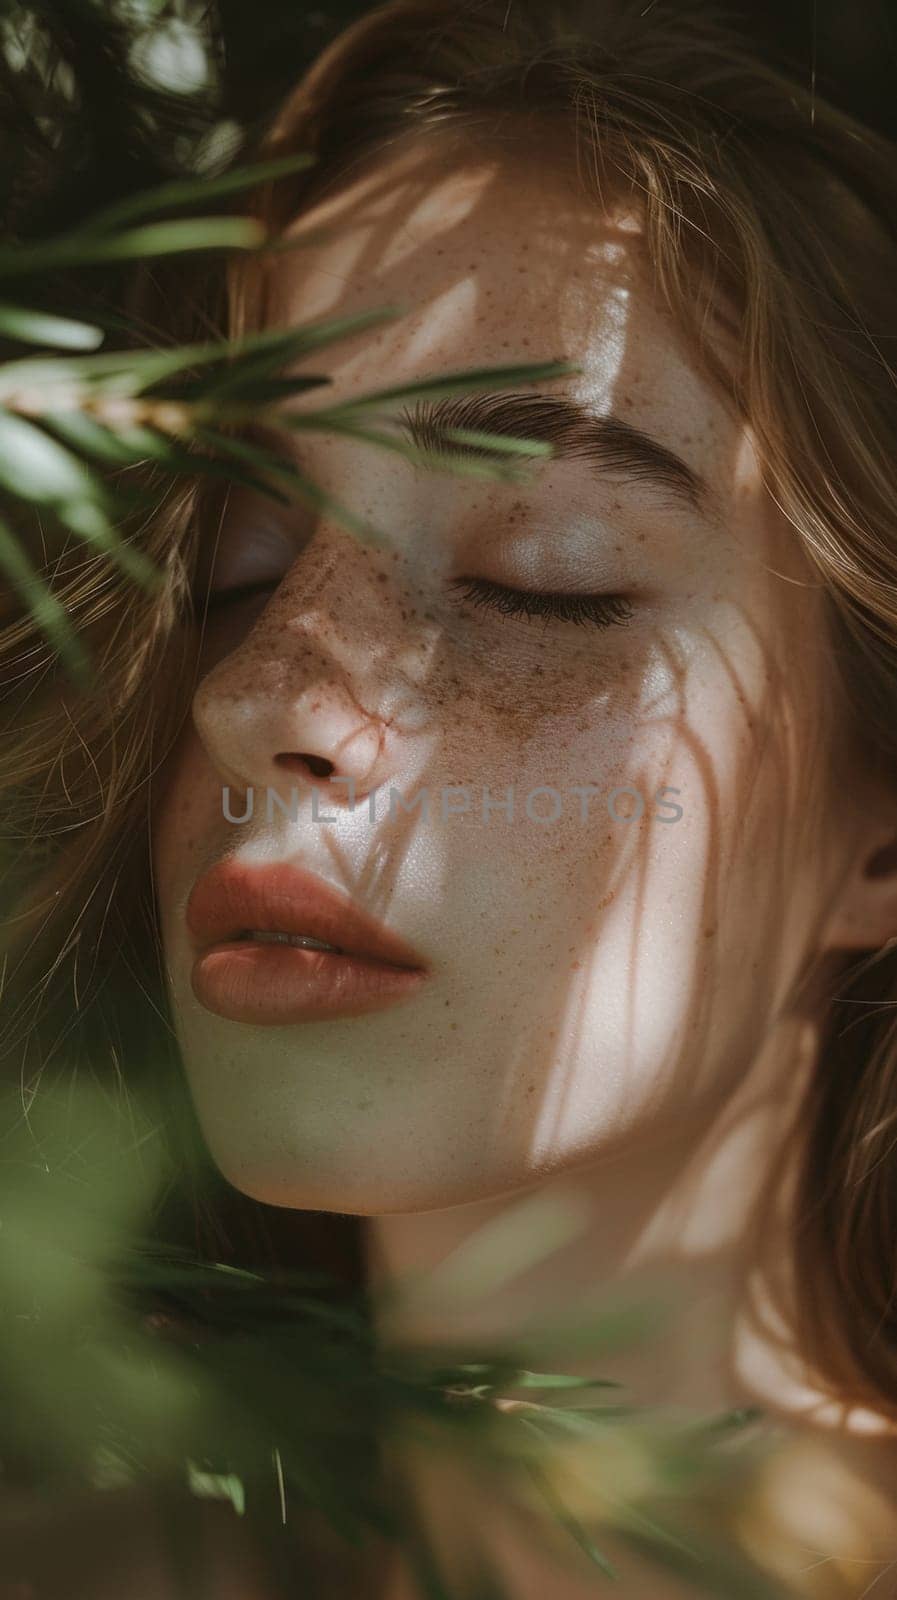 A woman with freckles and eyes closed in the shade, AI by starush